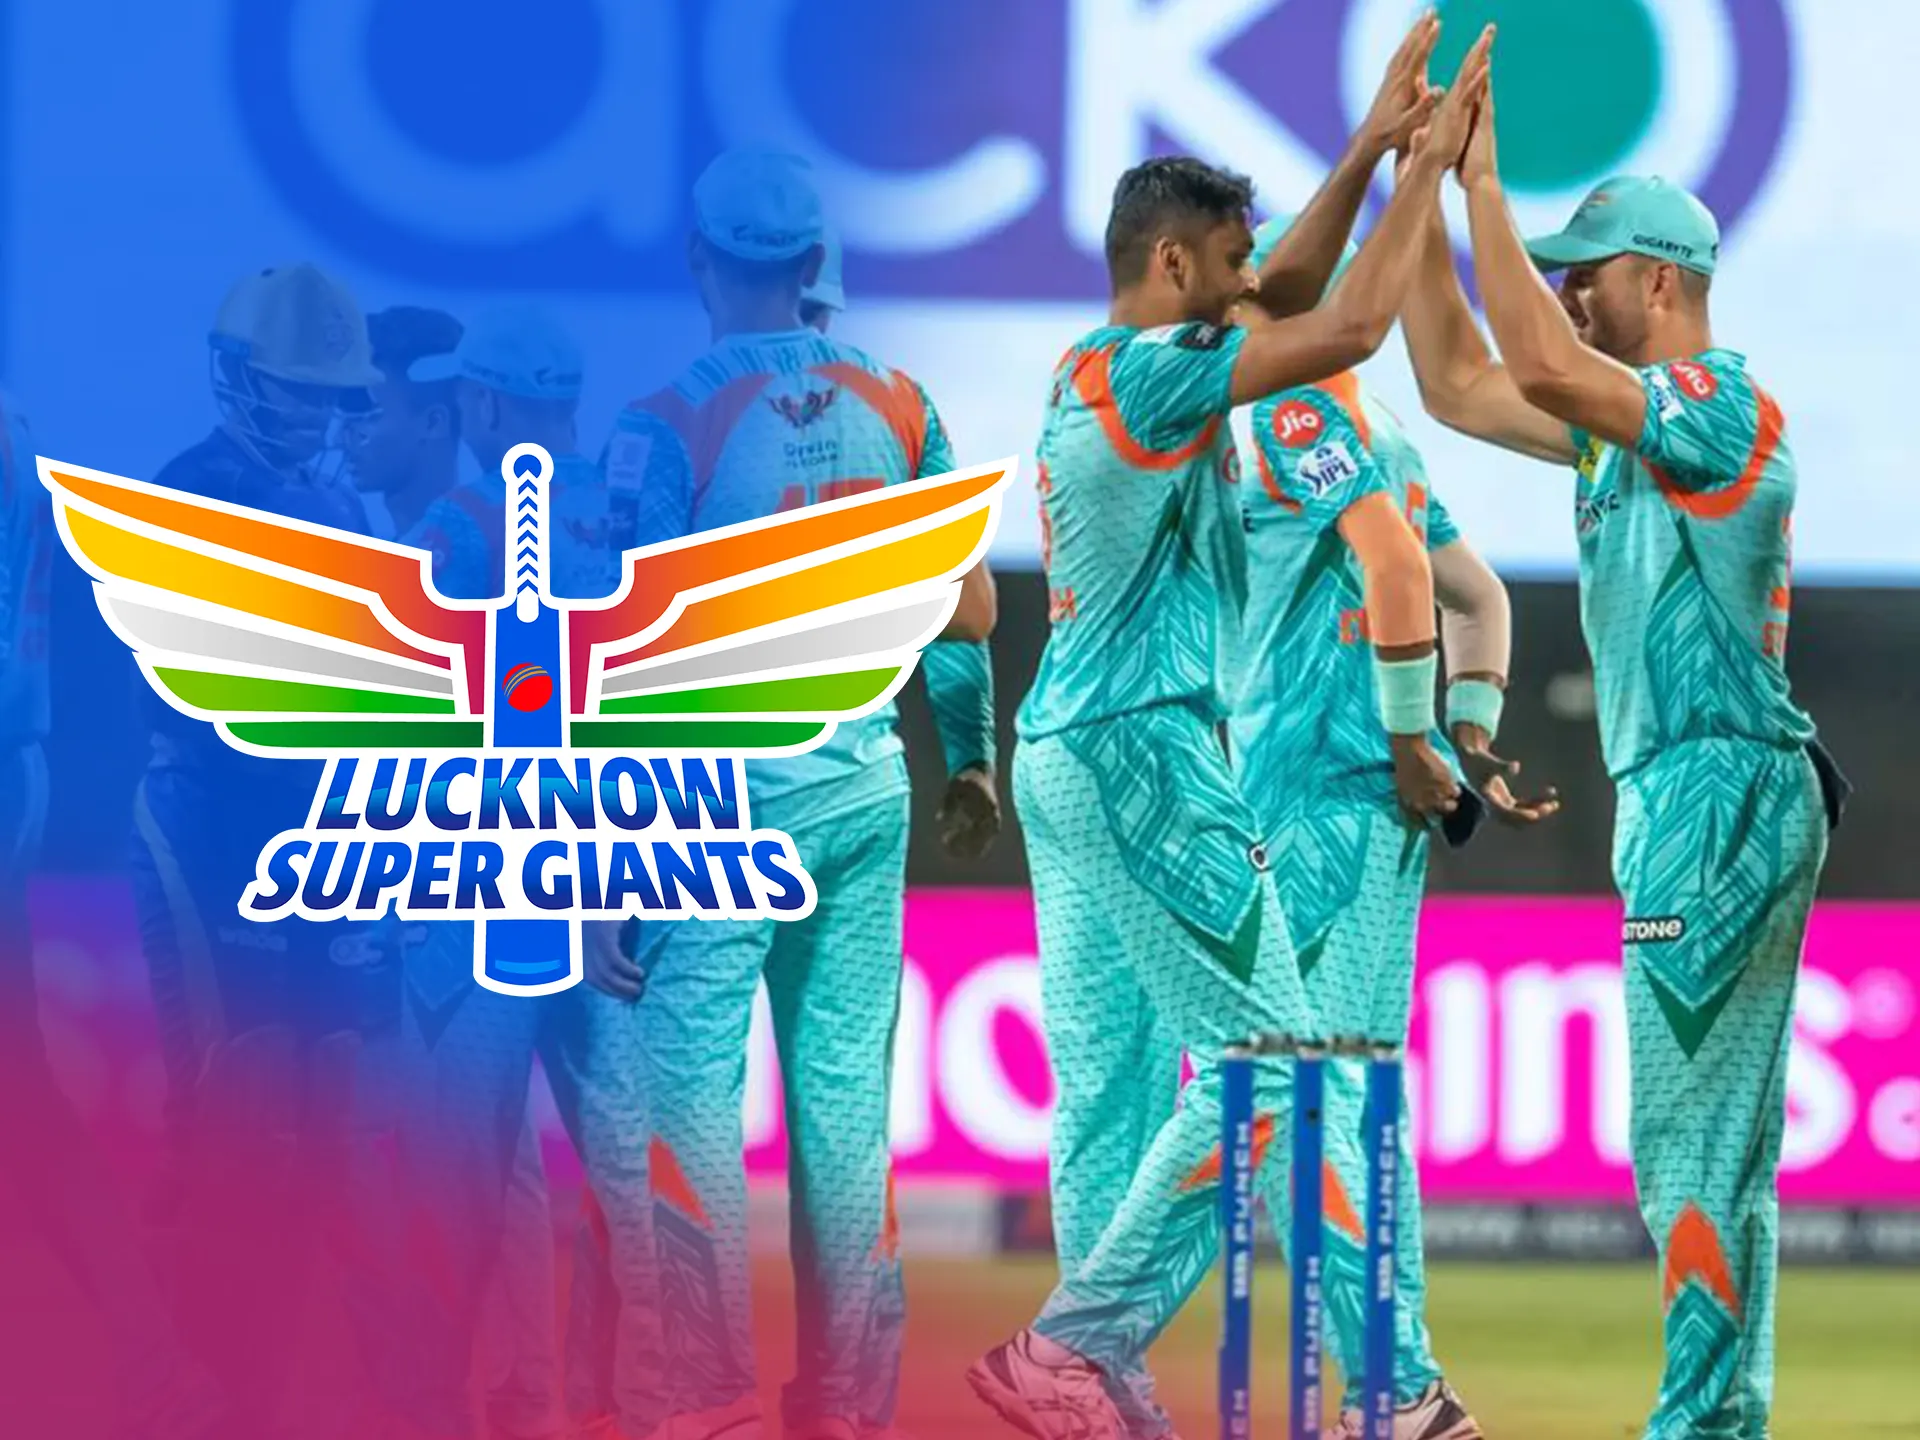 Win more money by betting on Lucknow Super Giants.